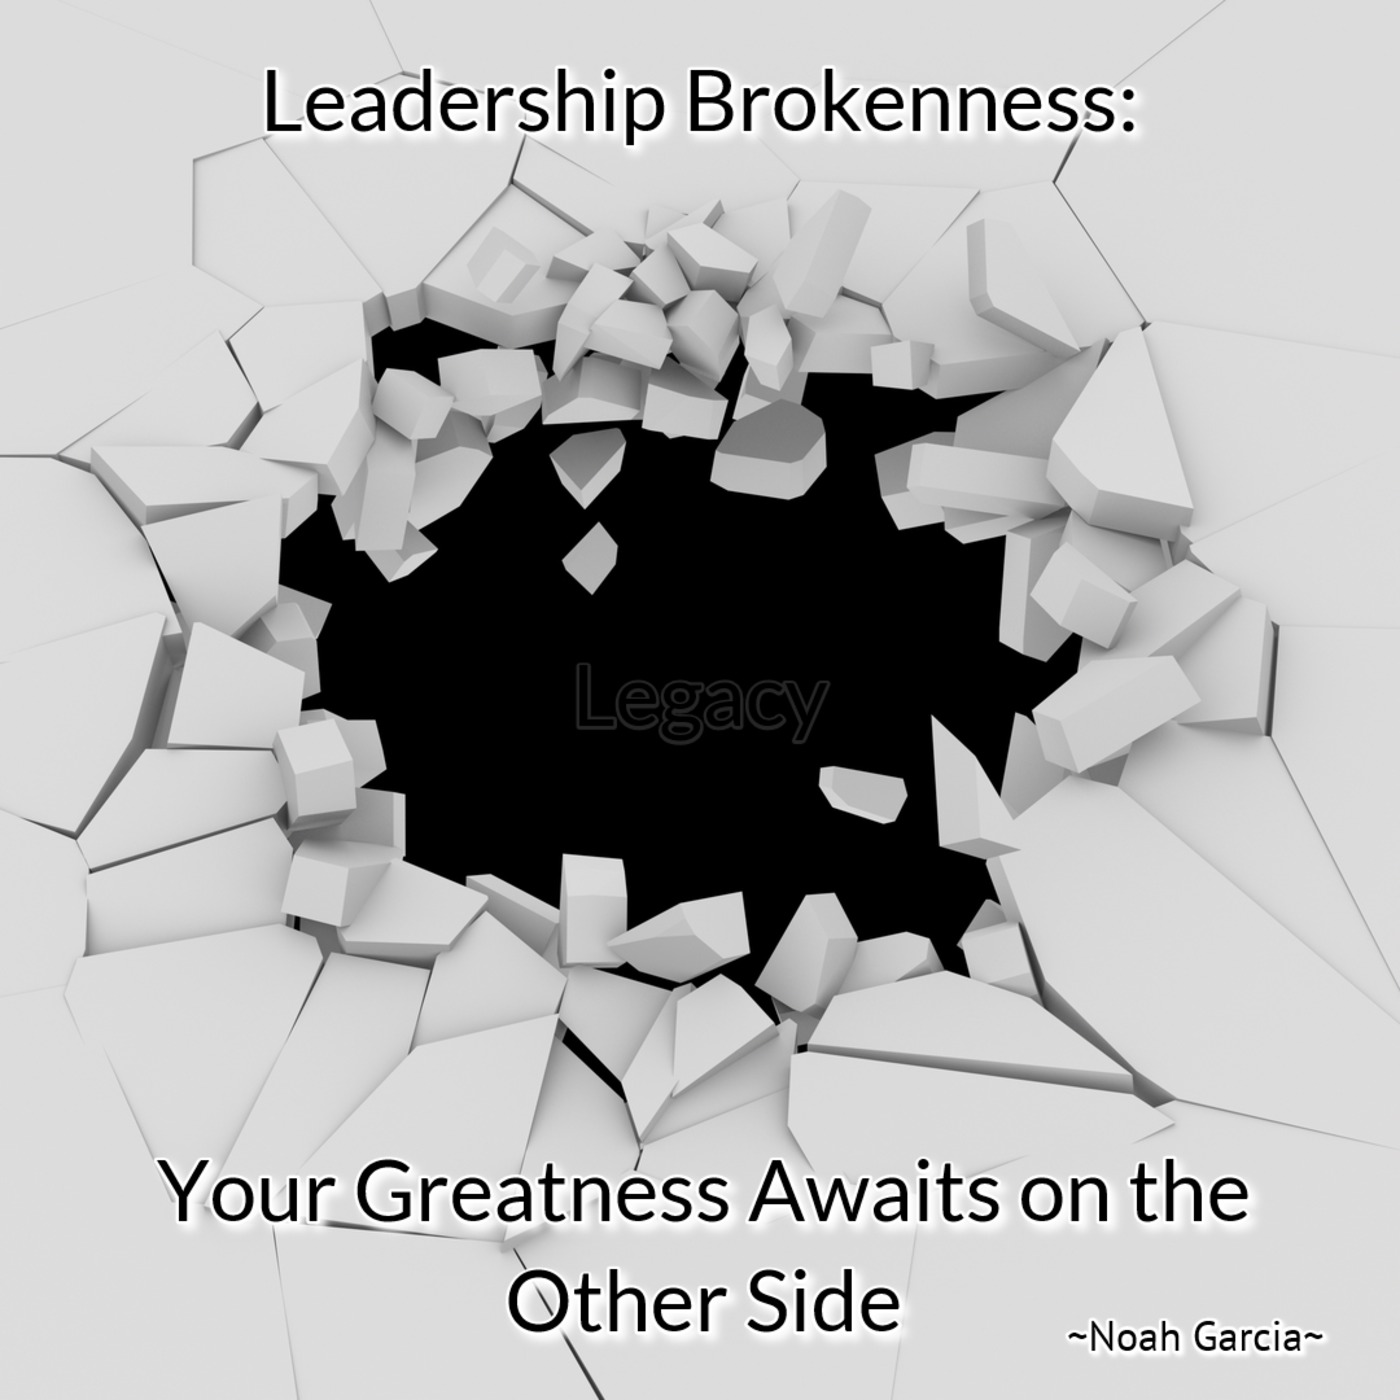 Leadership Brokenness: Your Greatness Awaits on the Other Side